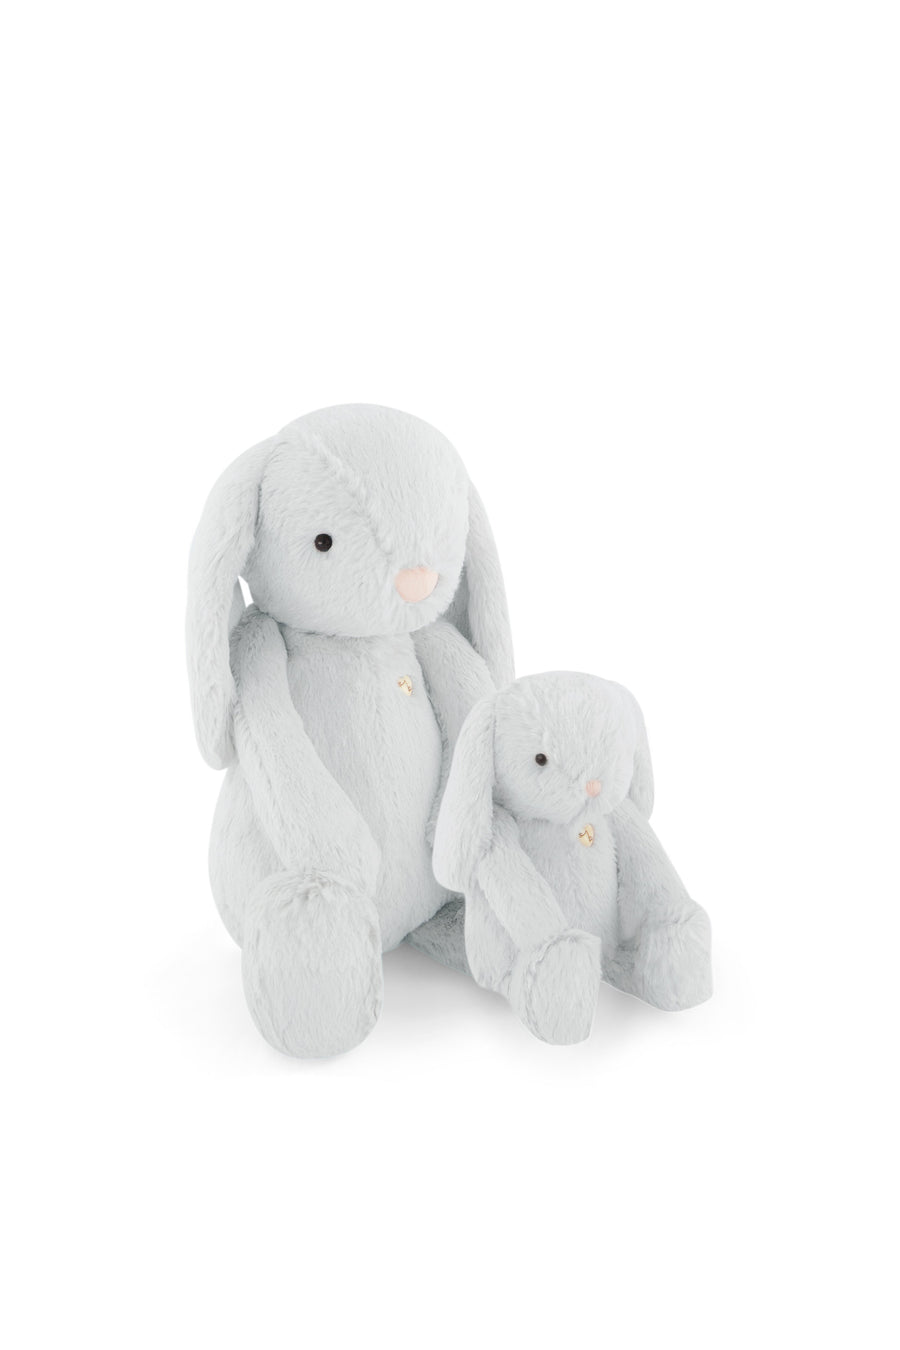 Snuggle Bunnies - Penelope the Bunny - Moonbeam Childrens Toy from Jamie Kay NZ